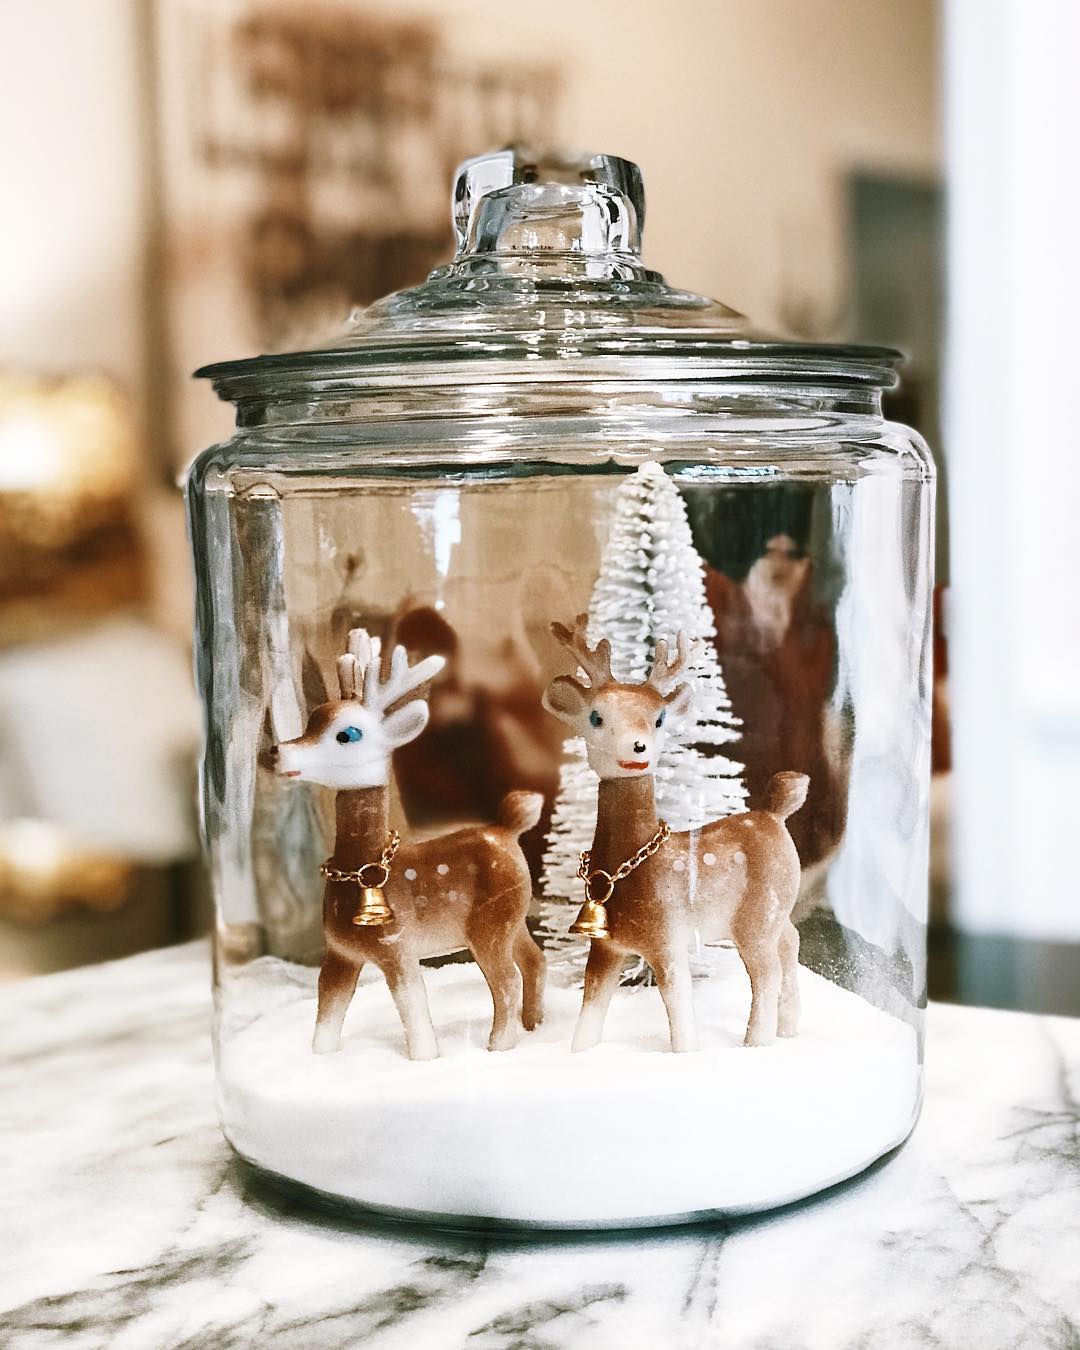 Homemade Snow Globe Made out of a Glass Jar with Toy Deer Inside. Photo by Instagram user @farmhousepeachco